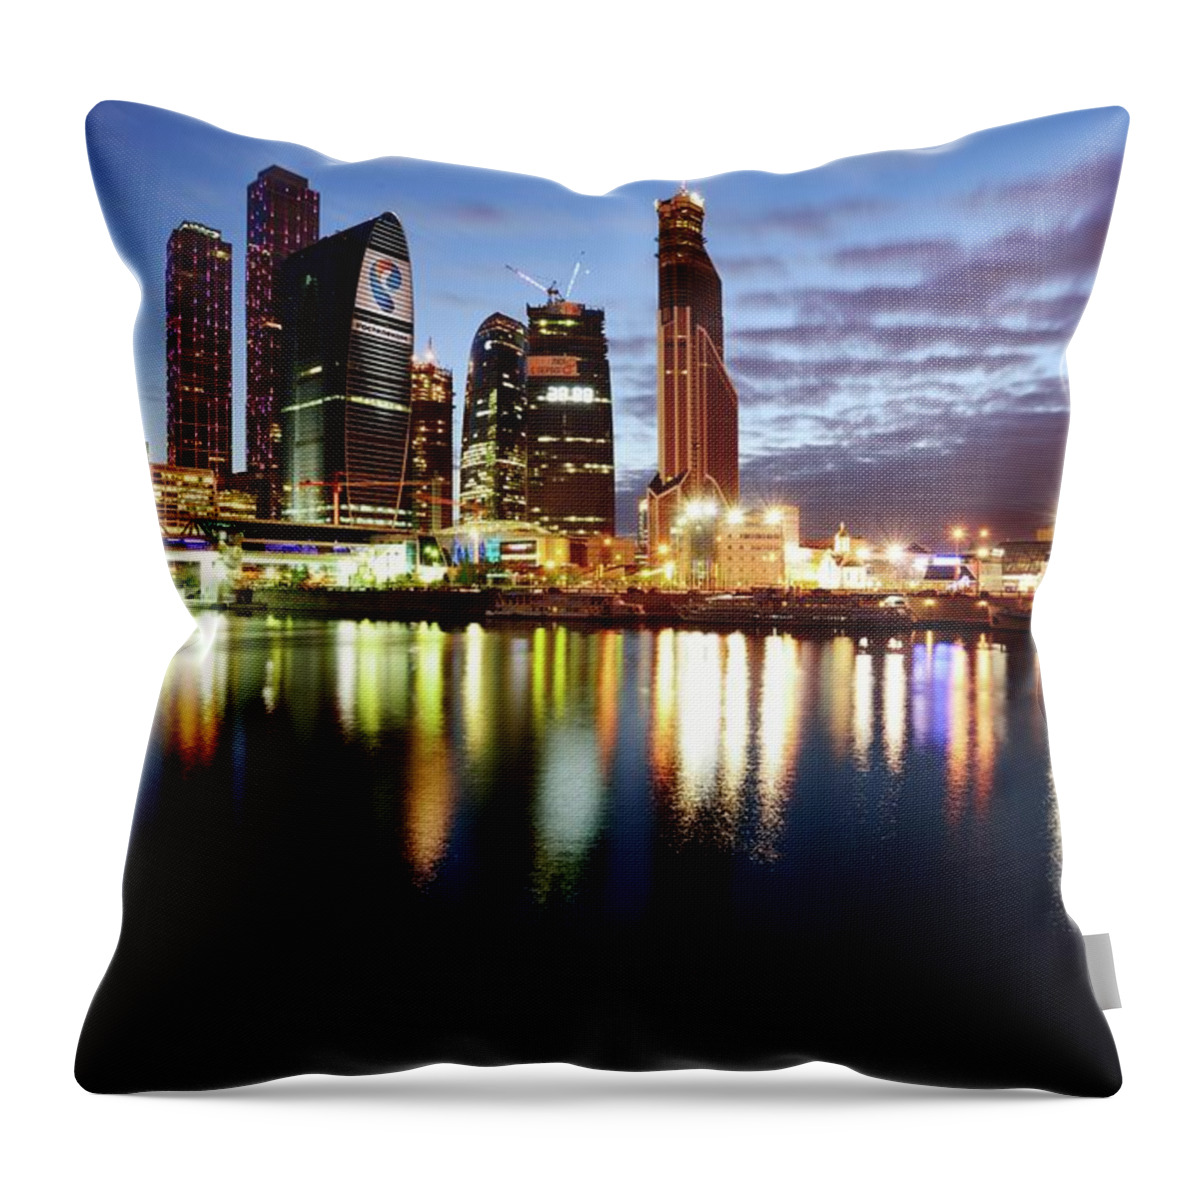 Scenics Throw Pillow featuring the photograph Moscow City At Dusk #1 by Vladimir Zakharov